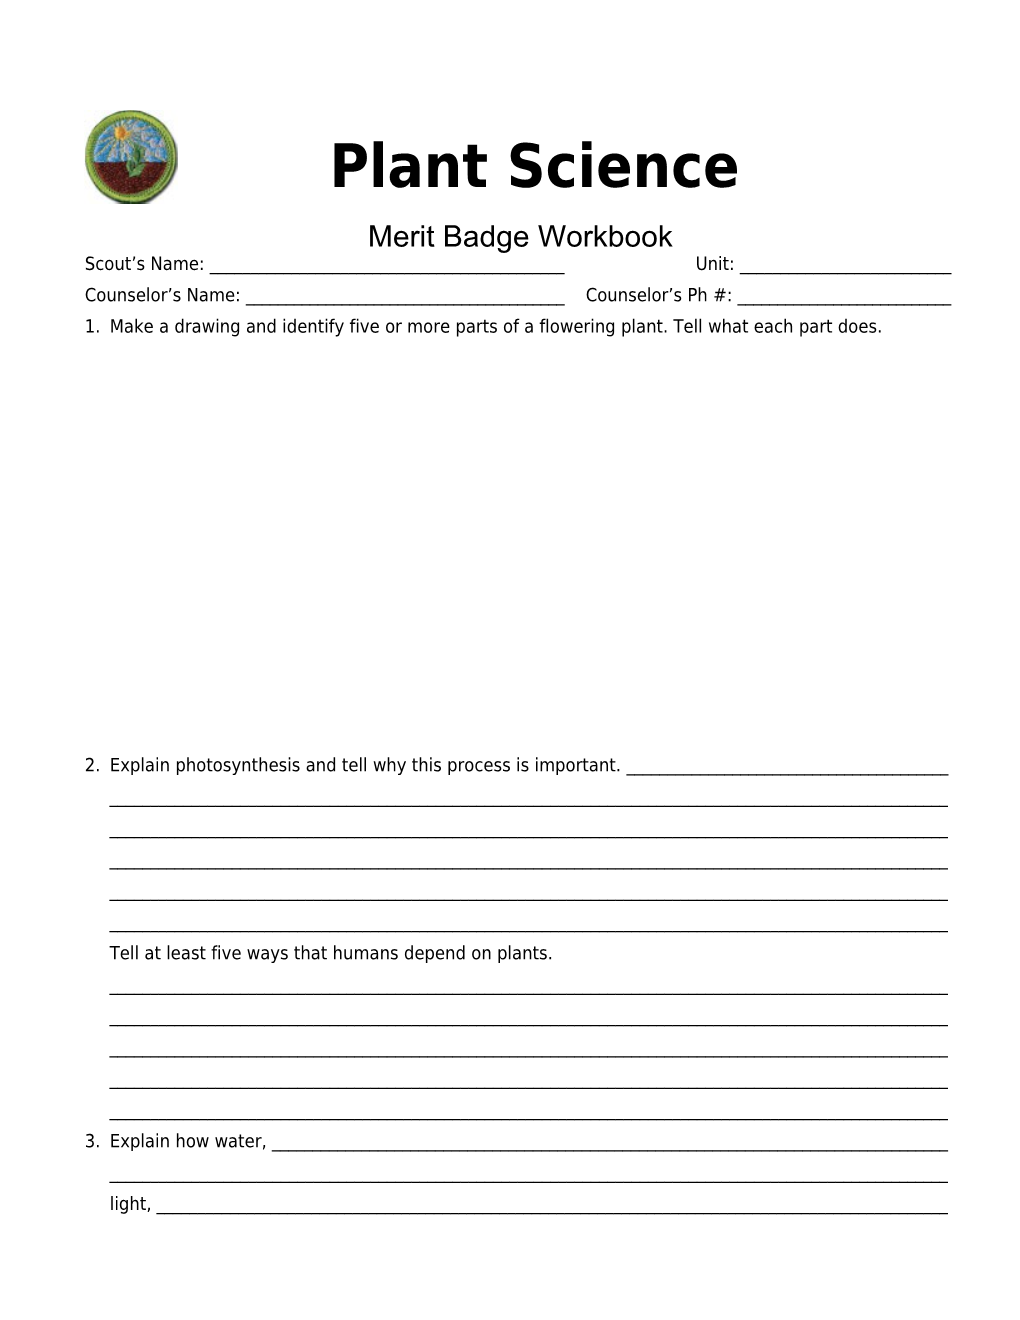 Plant Science P. 7 Merit Badge Workbook Scout's Name: ______